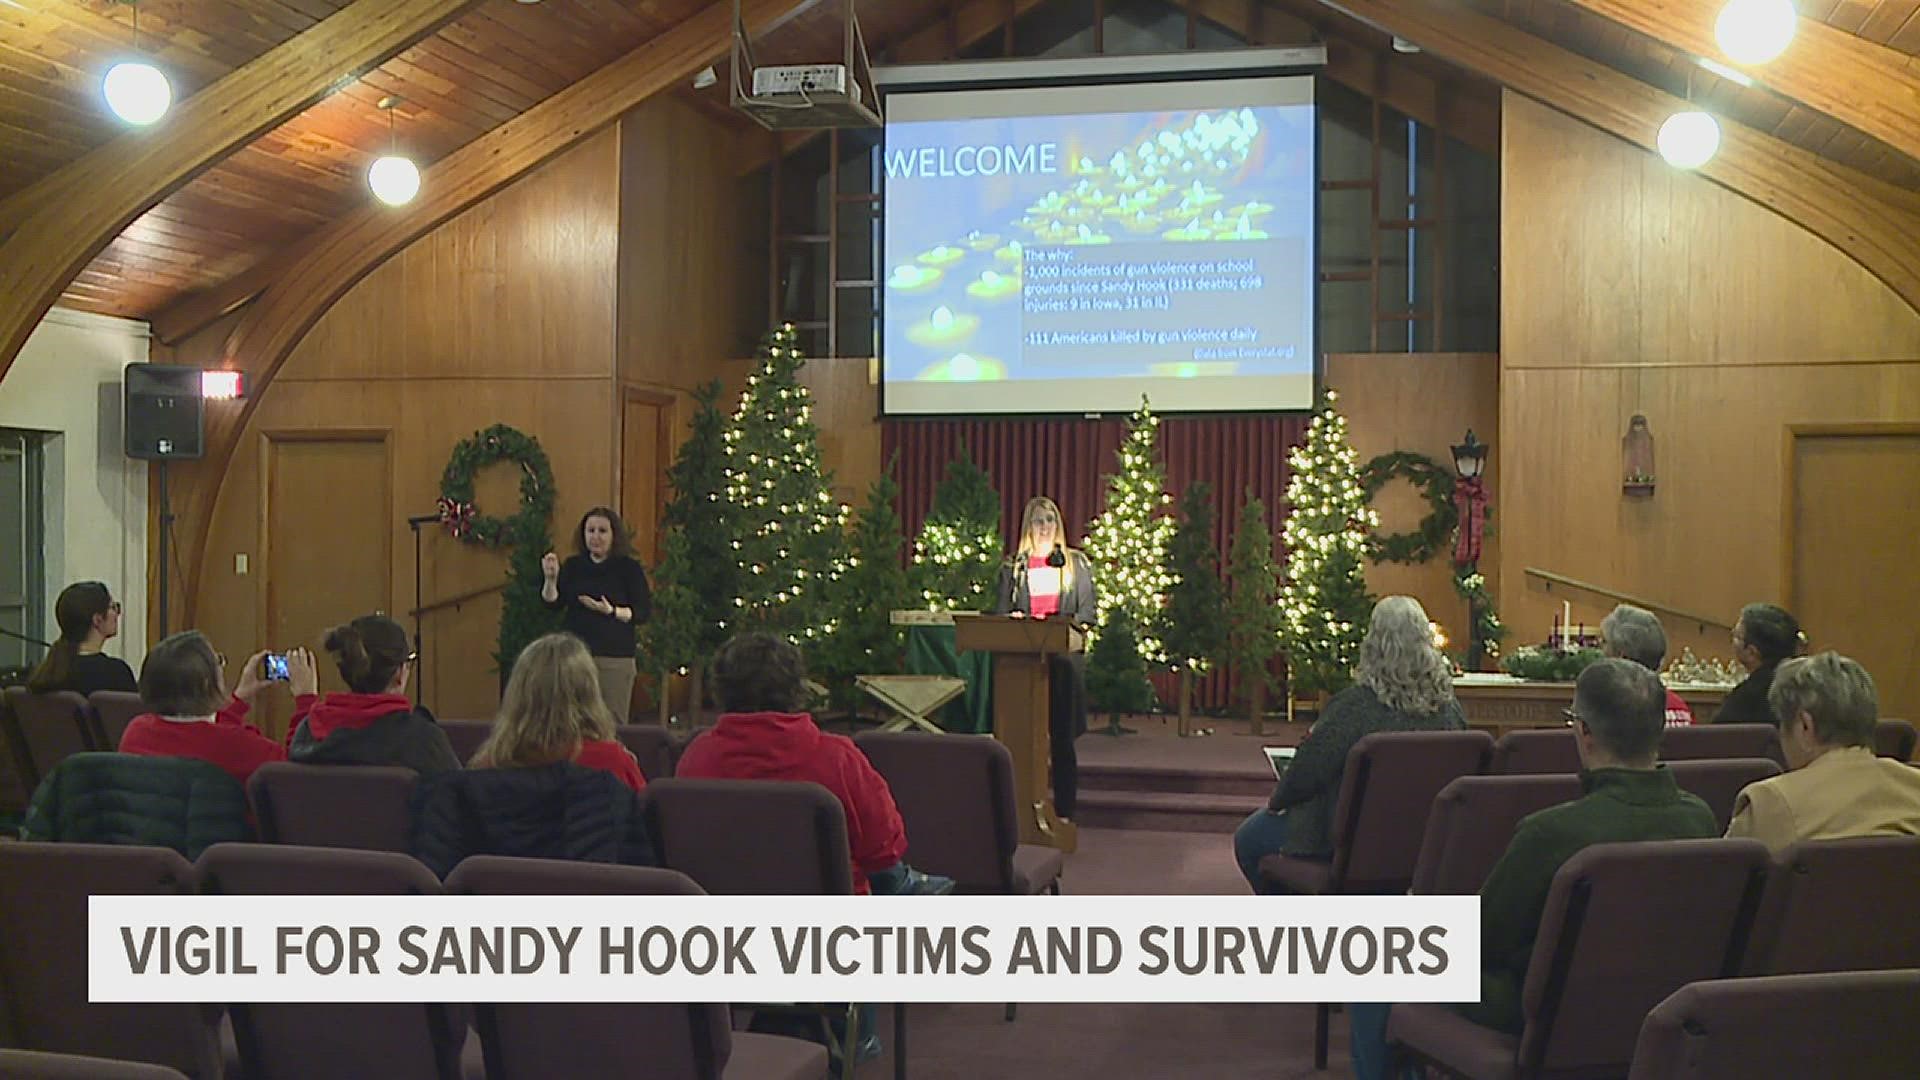 The event, hosted at Community of Christ Church in Davenport, named and honored the 26 people shot and killed at Sandy Hook Elementary School on Dec. 14, 2012.